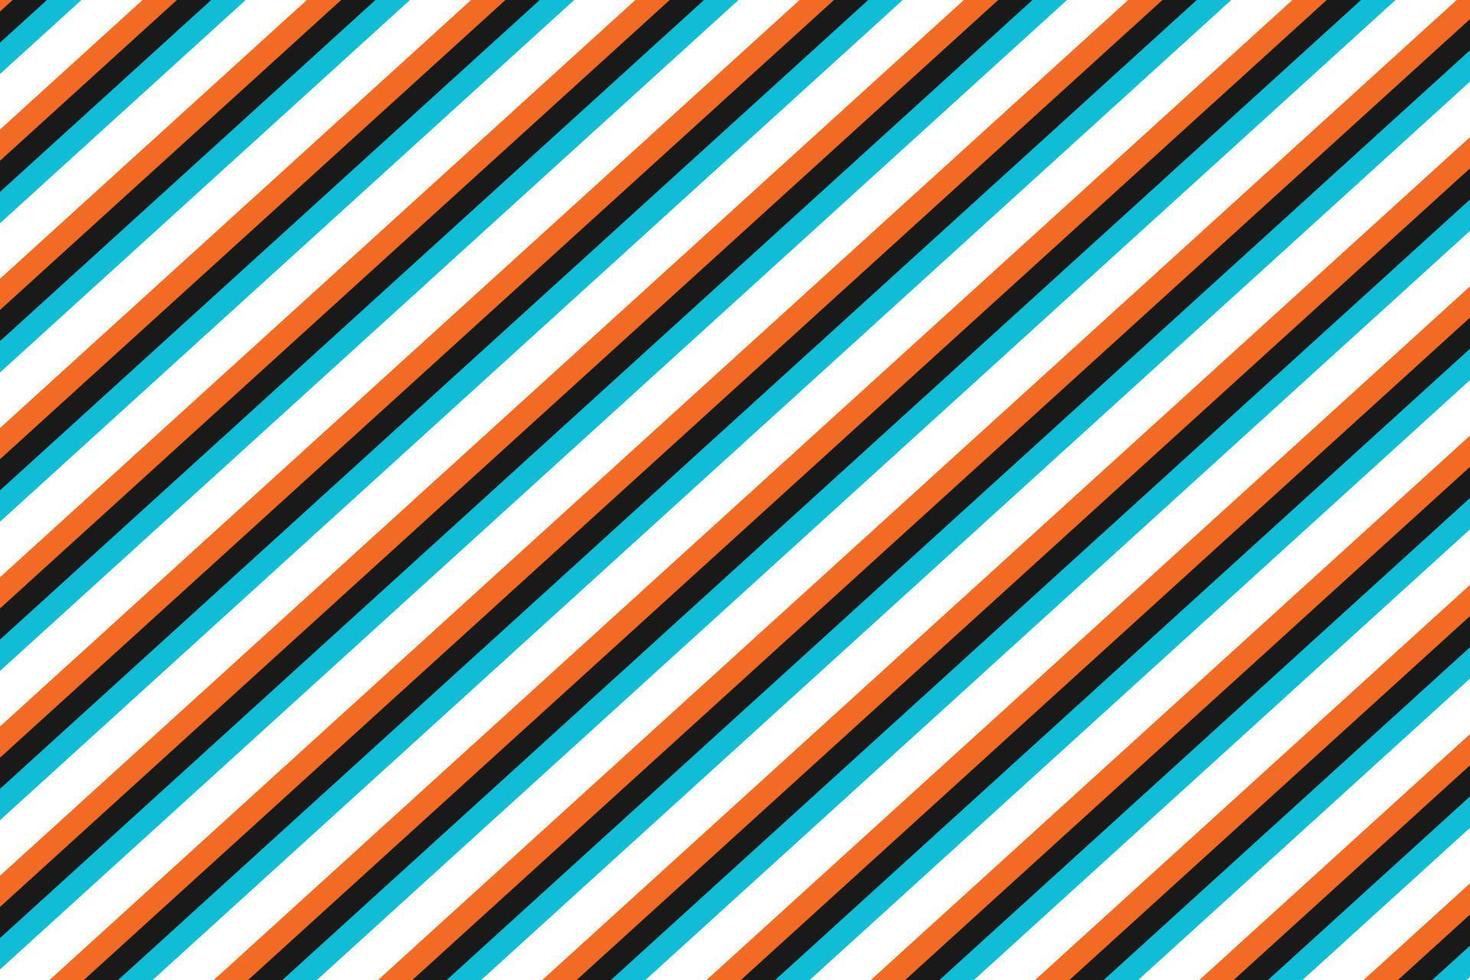 abstract orange black and blue diagonal stripe straight lines pattern for banner, poster. vector